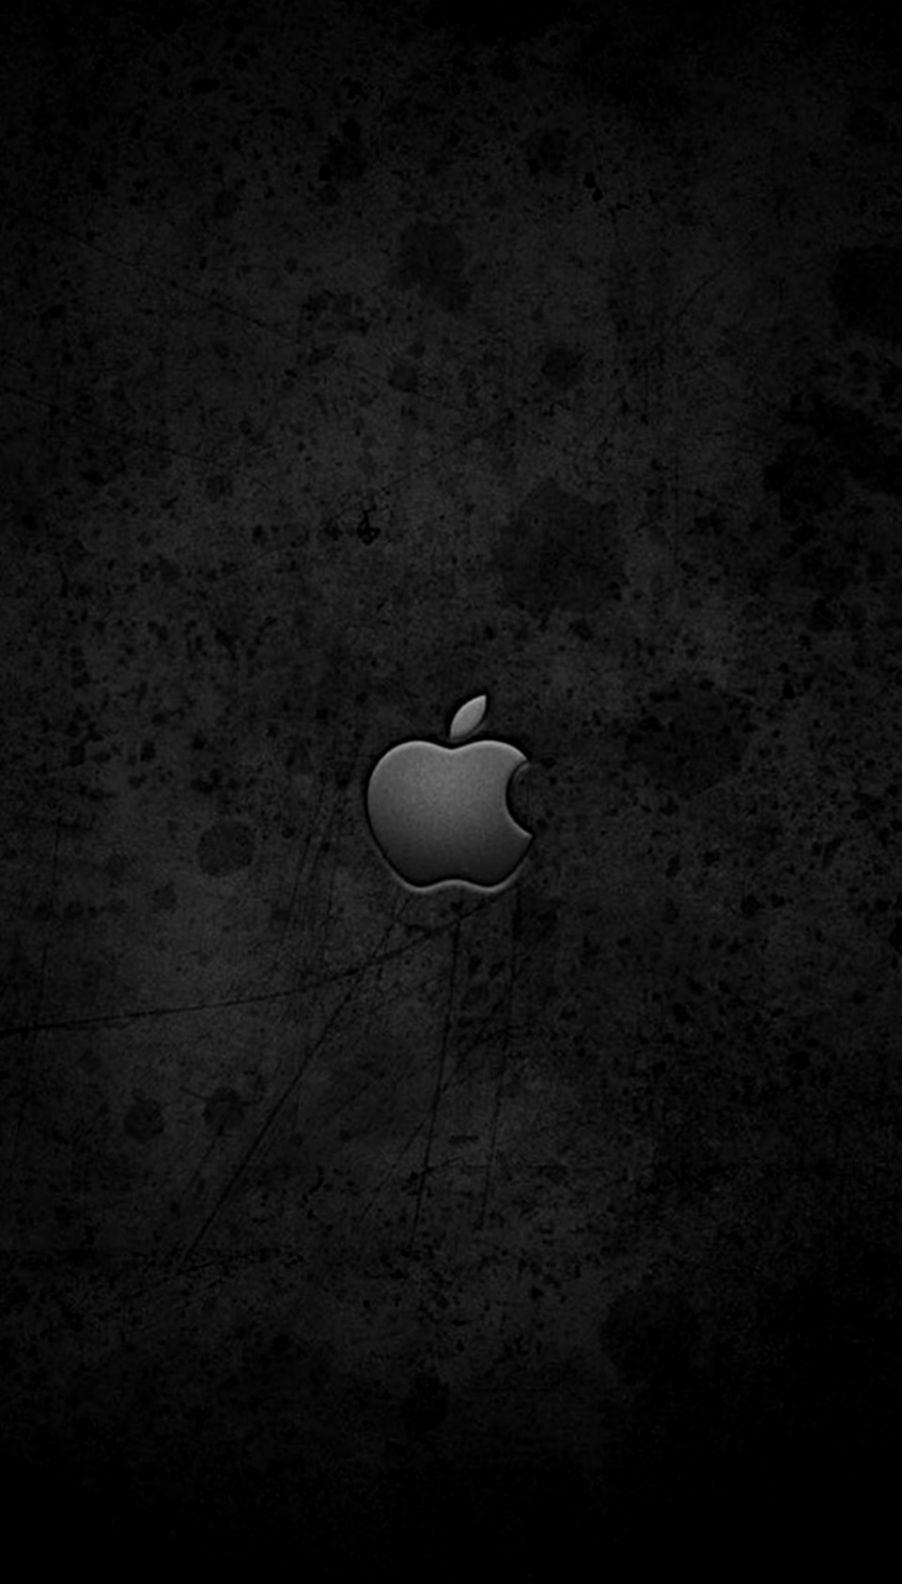 Black Apple Logo Wallpaper For iPhone 6 photo of iPhone Wallpaper